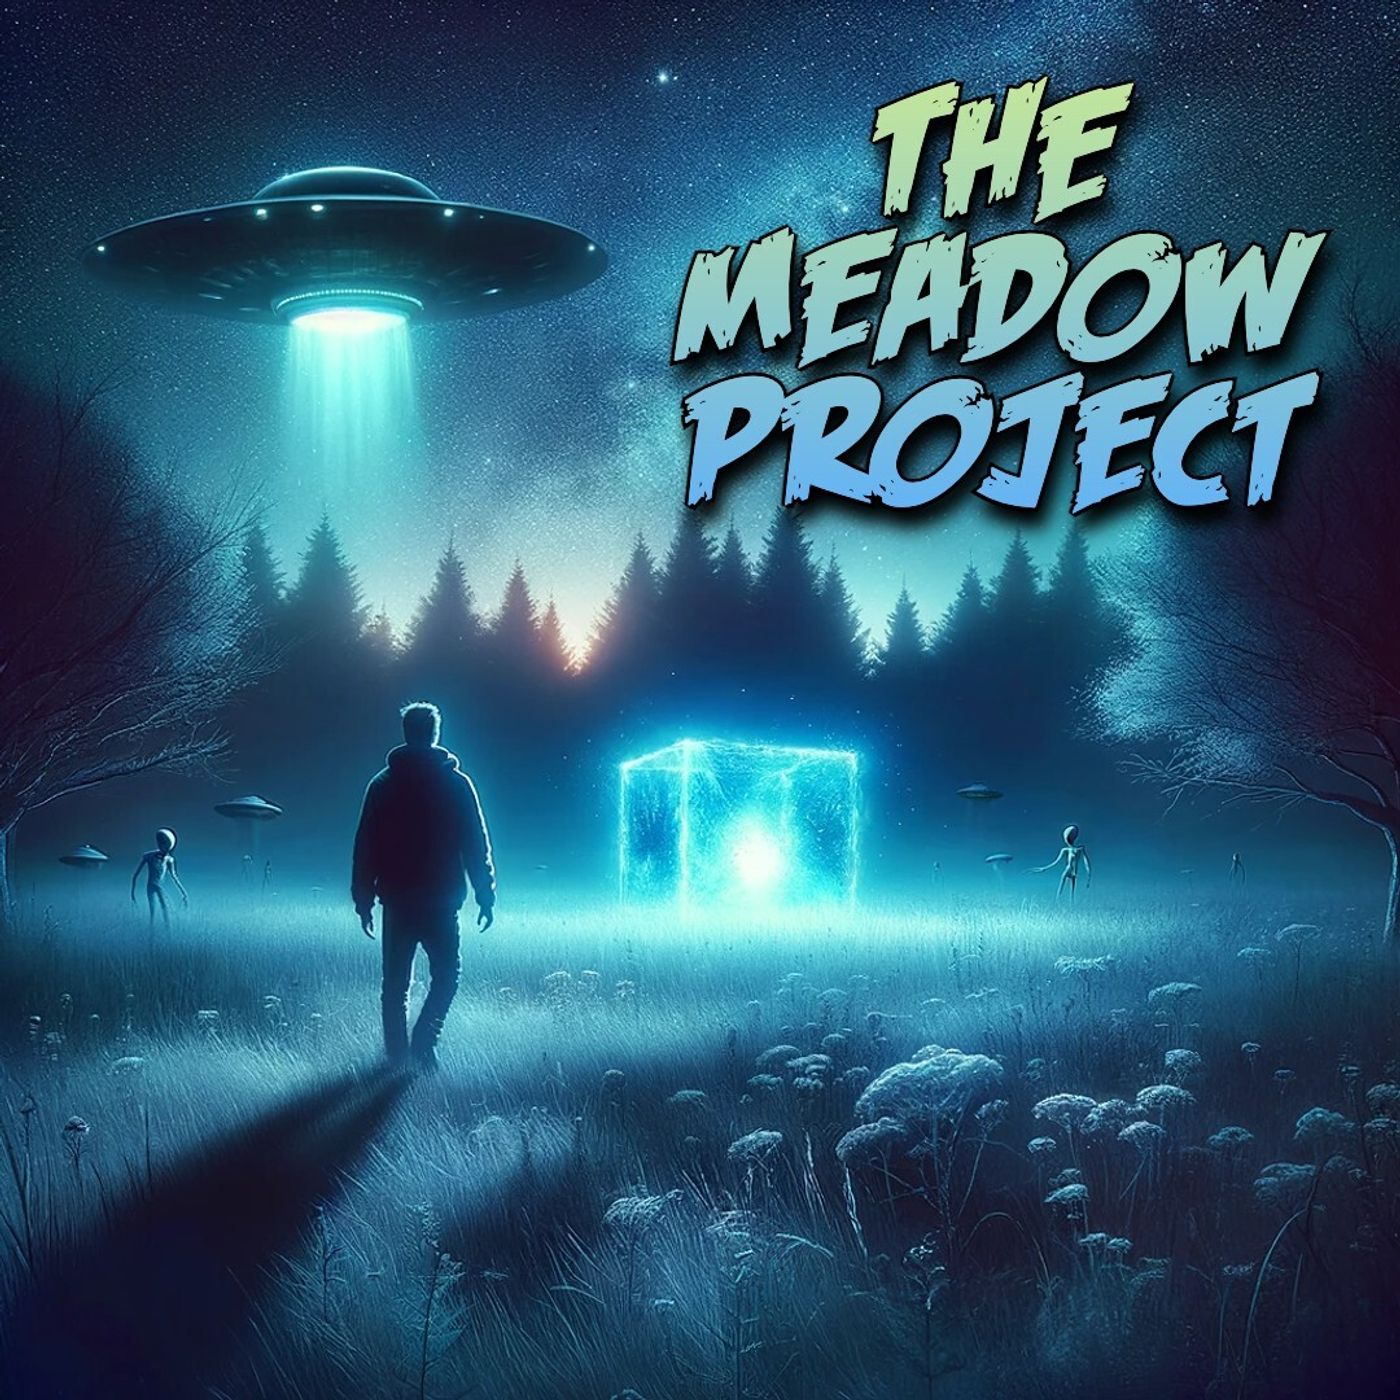 617: The Meadow Project